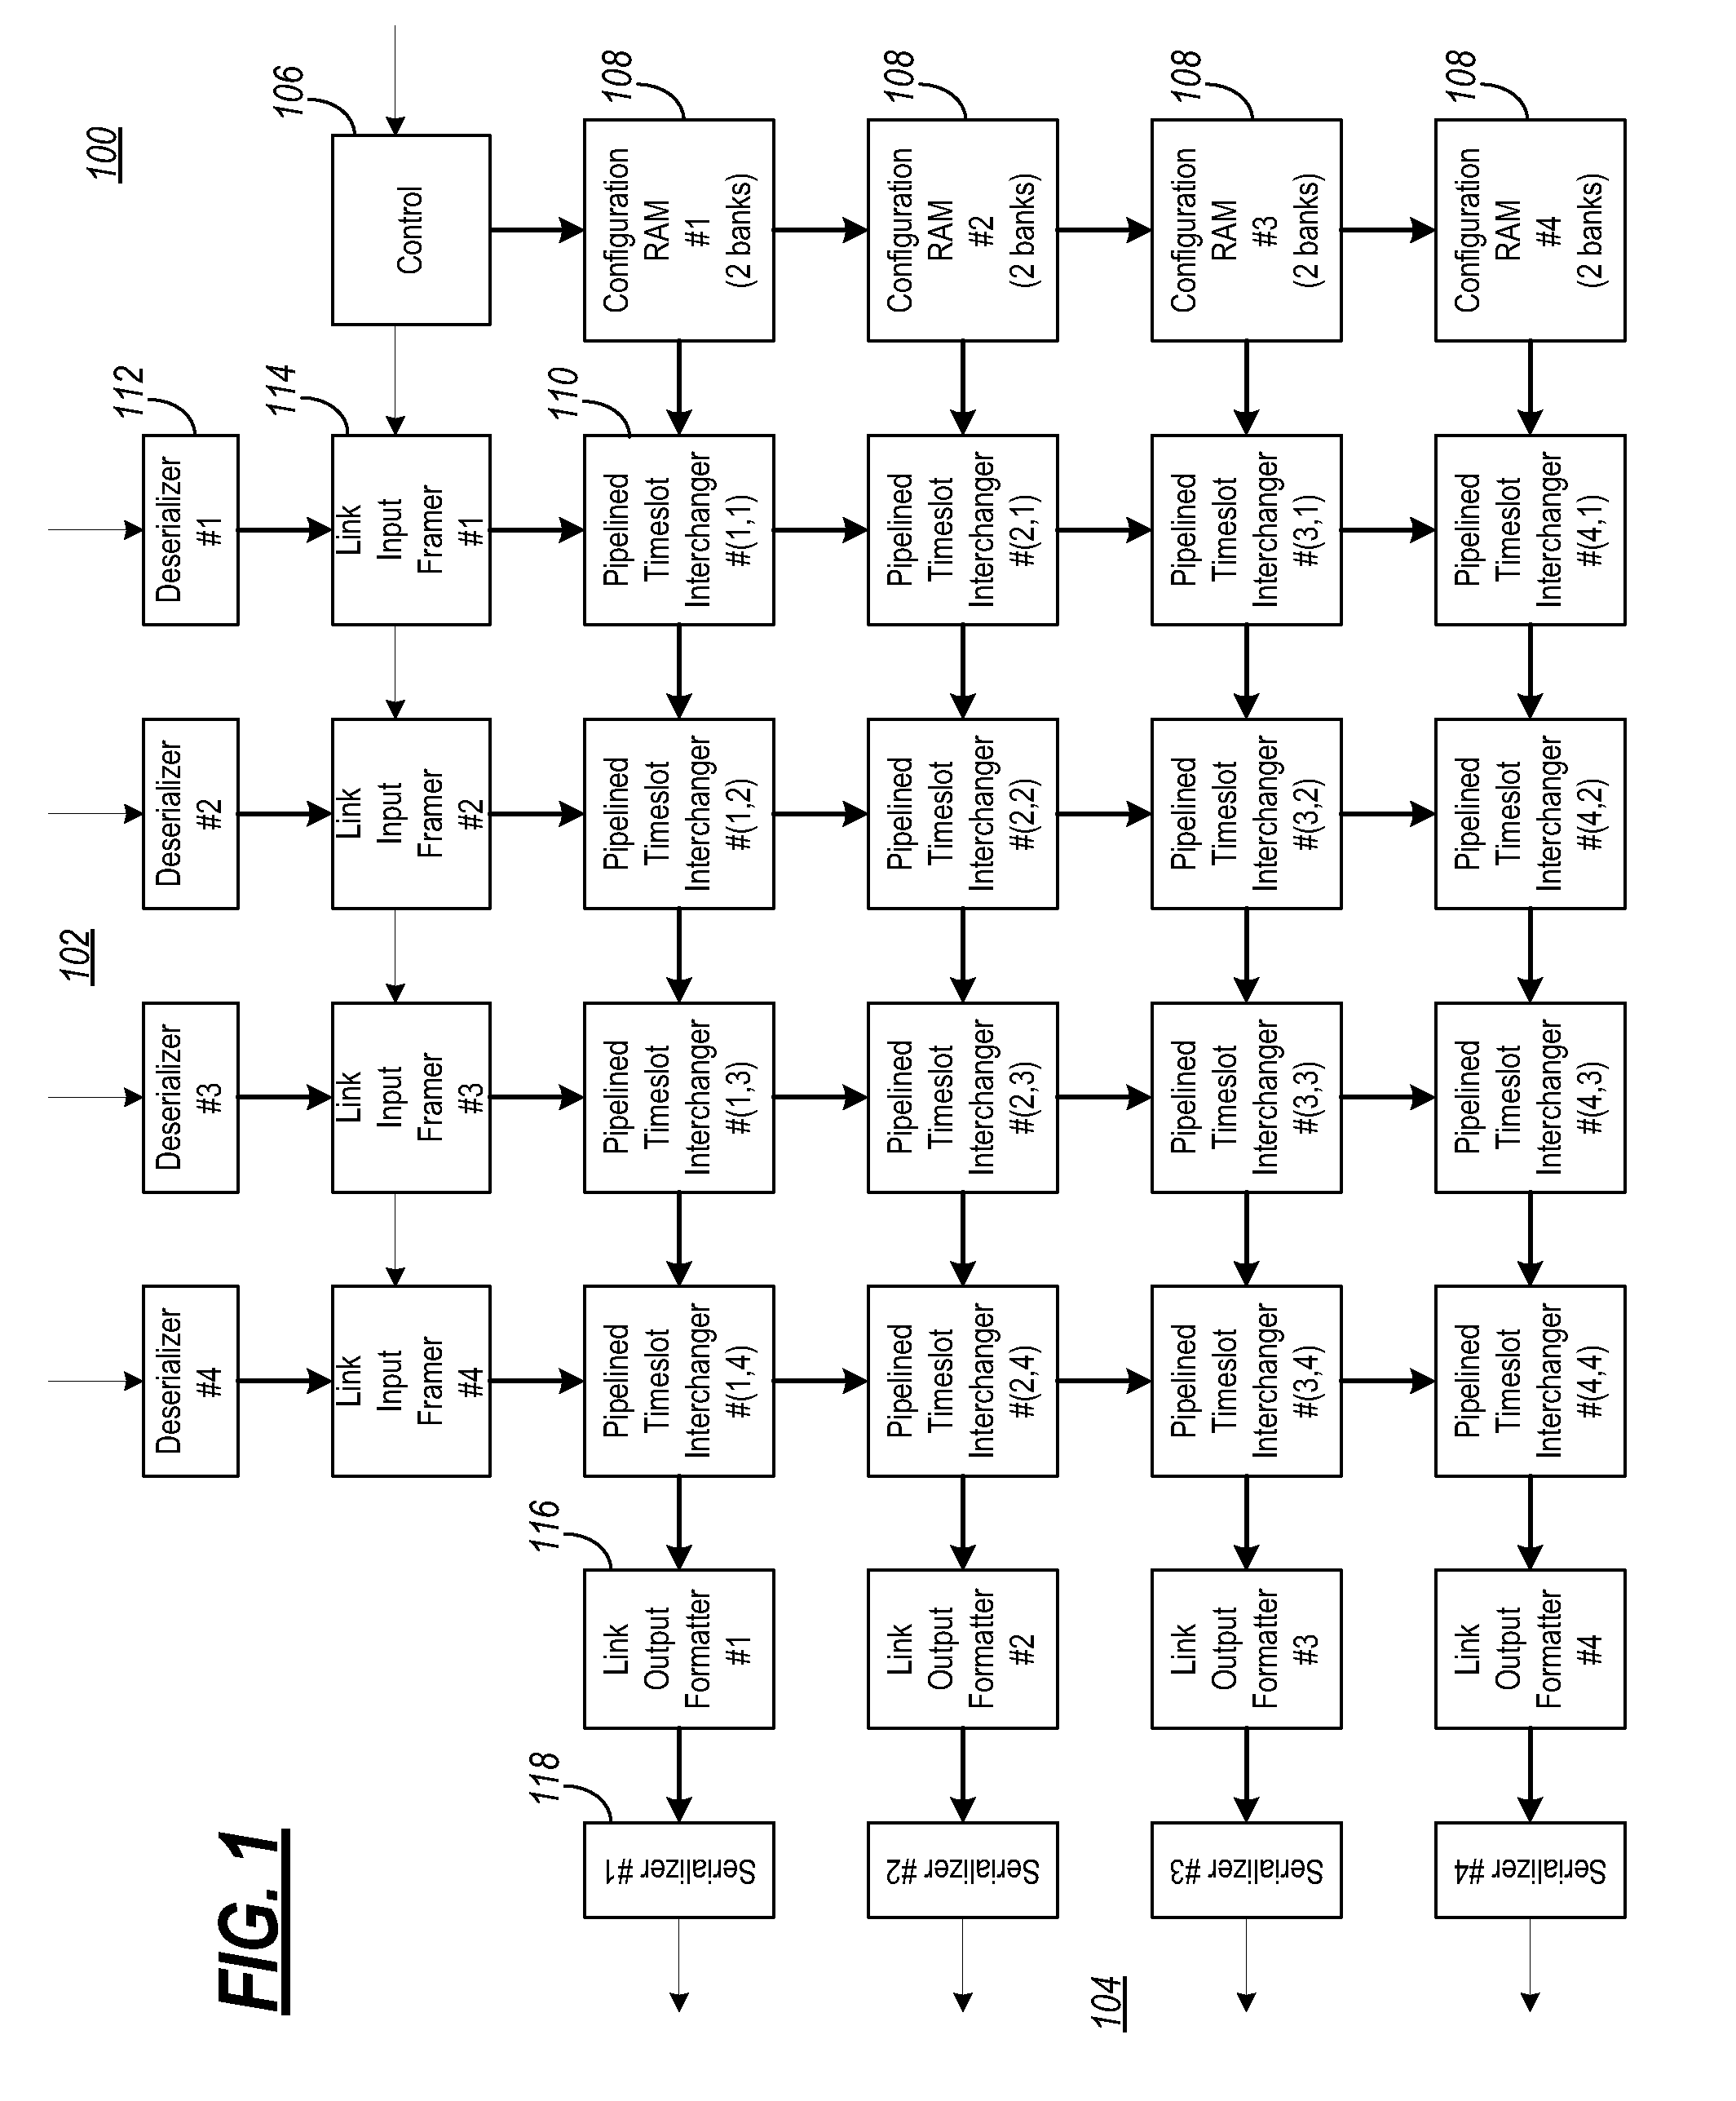 Extensible time space switch systems and methods